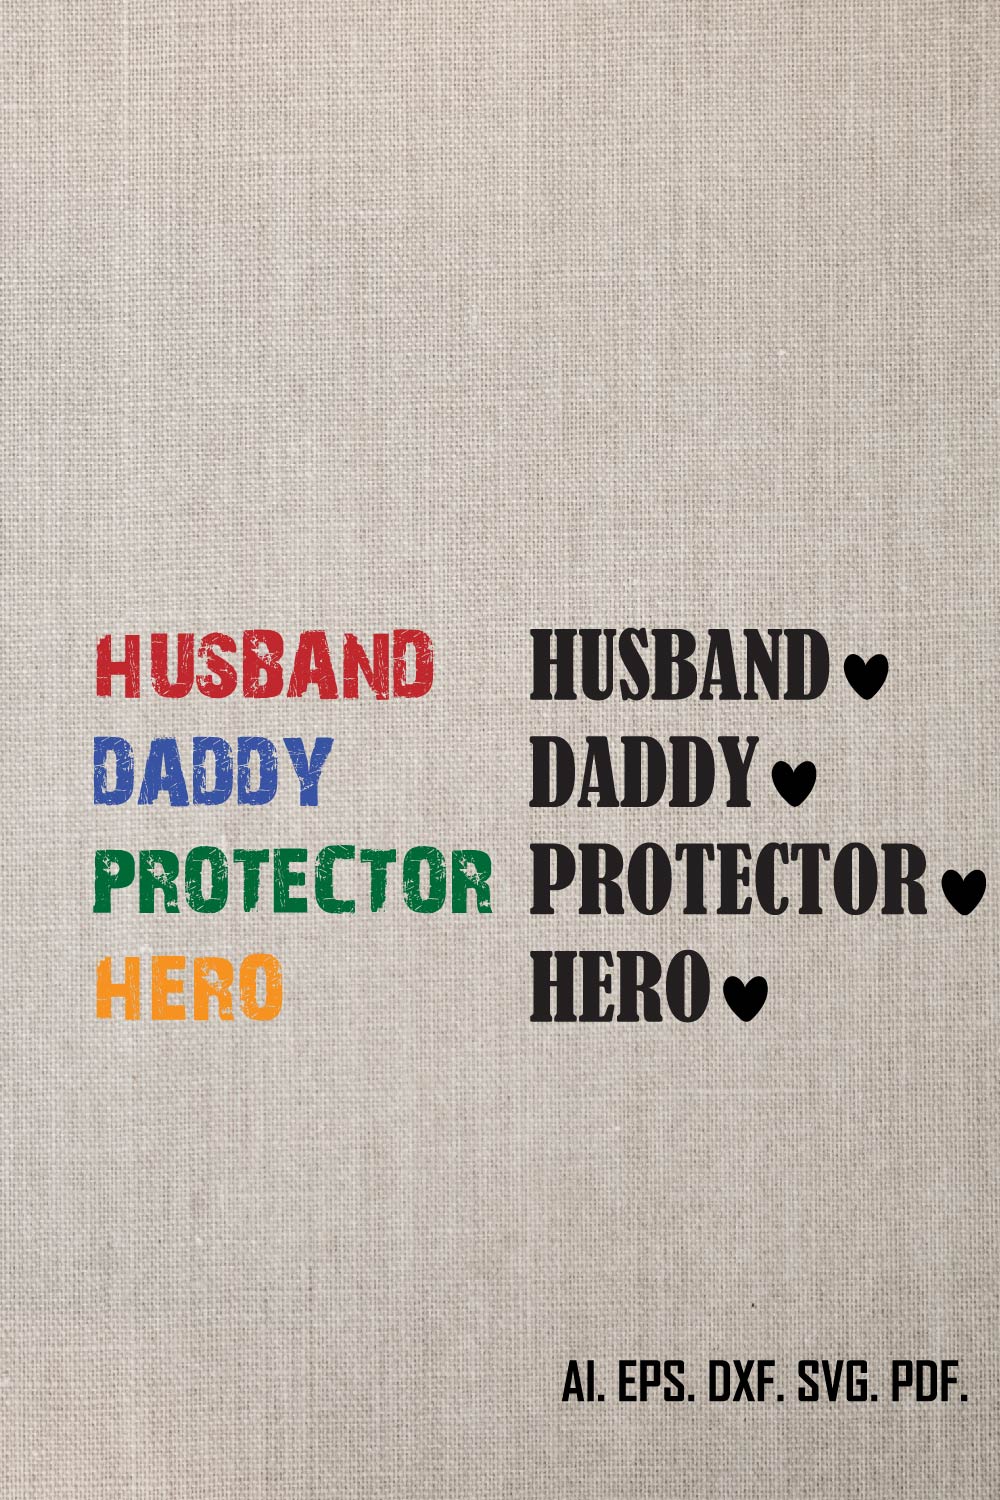 Husband Daddy Protector Hero svg - Dad svg - Father's Day - Funny Dad Shirt Design - Cut File - svg - dxf - eps - png - Silhouette - Cricut pinterest preview image.